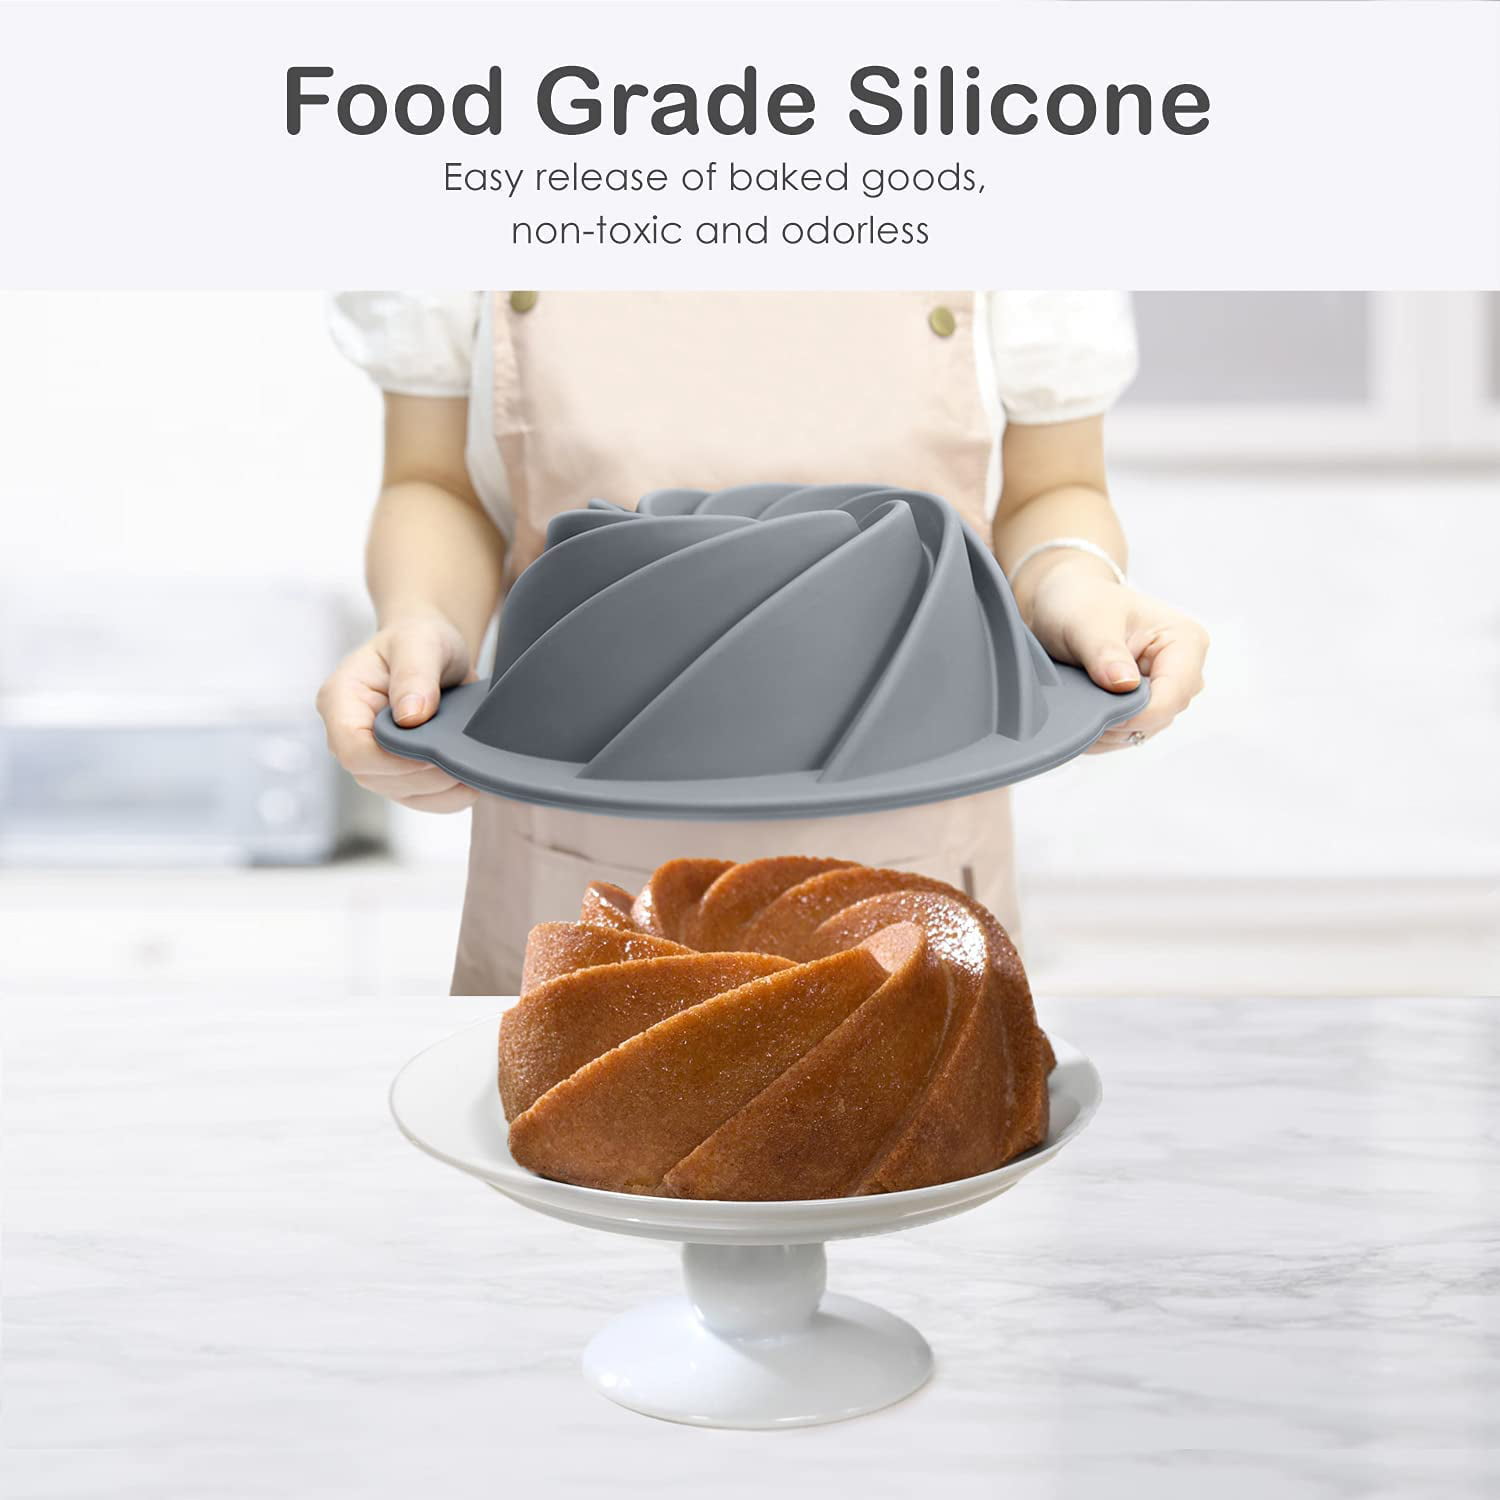 SILIVO 9.5 inch Round Cake Pans (2 Pack) - Silicone Cake Molds for Baking,  Nonstick Baking Pans for Layer Cake, Cheese Cake and Chocolate Cake - 9.5